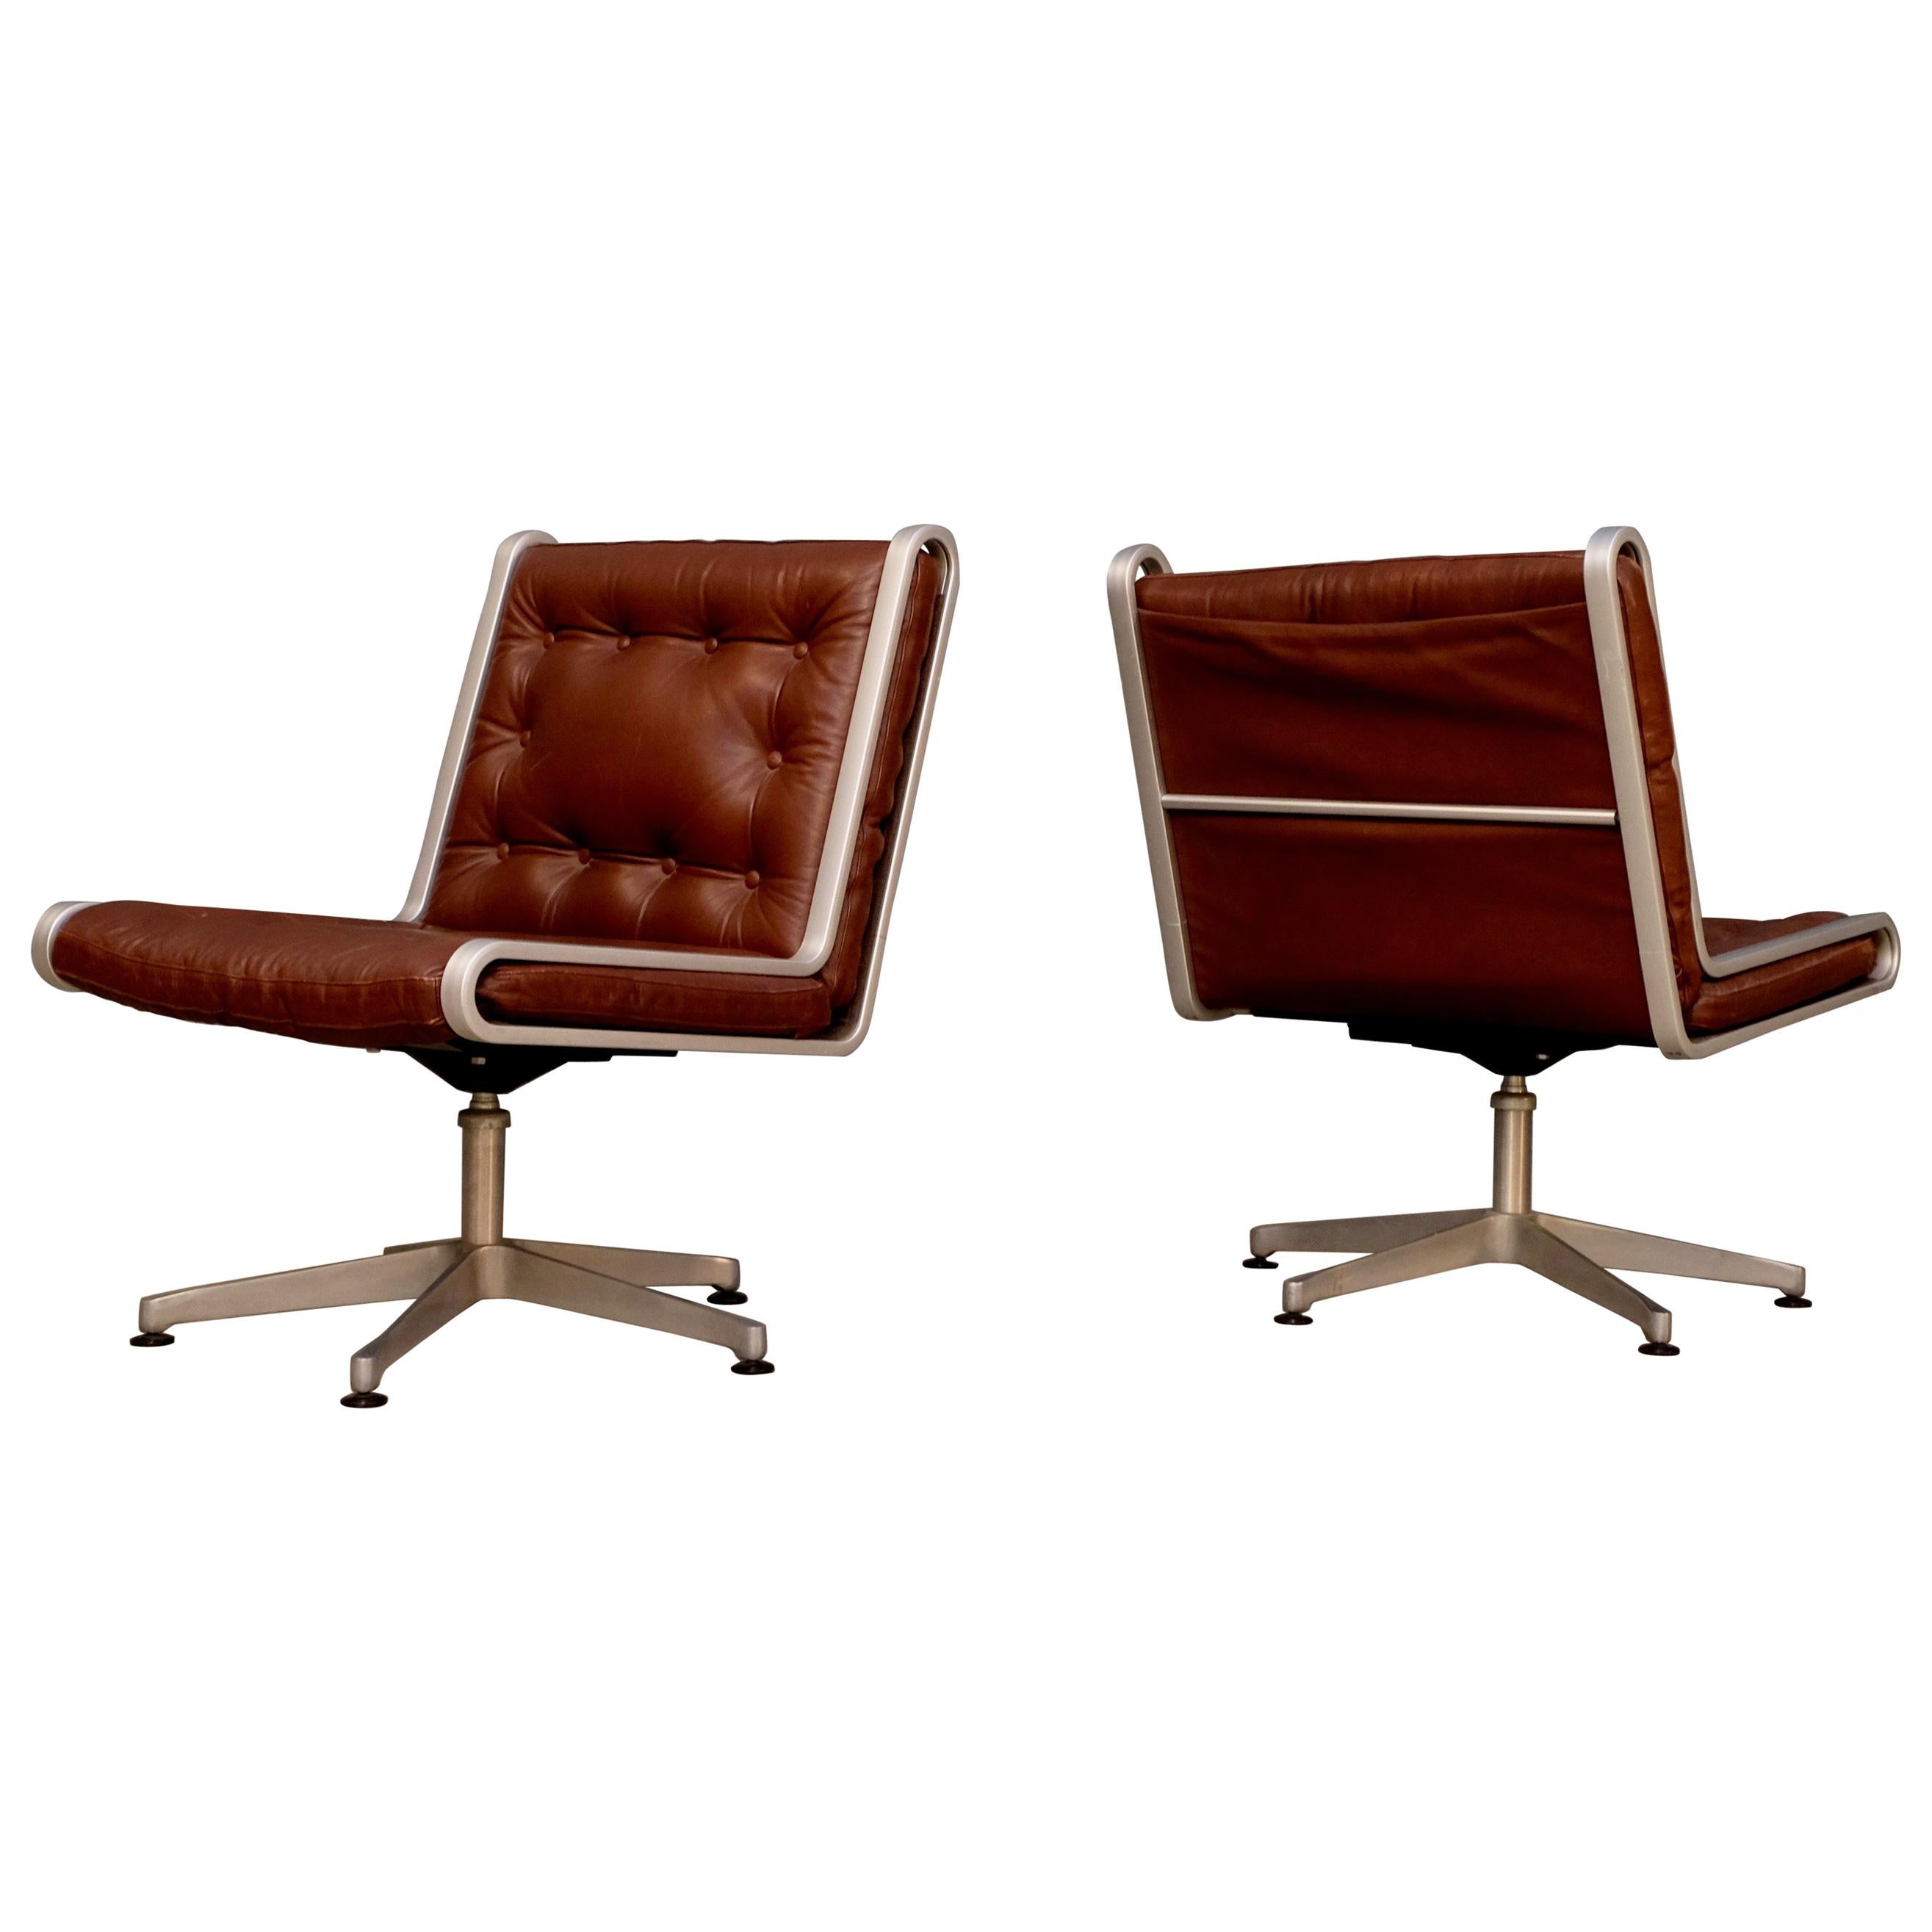 Pair of Erik Sigfrid Persson Easy Chairs, Sweden, 1970s